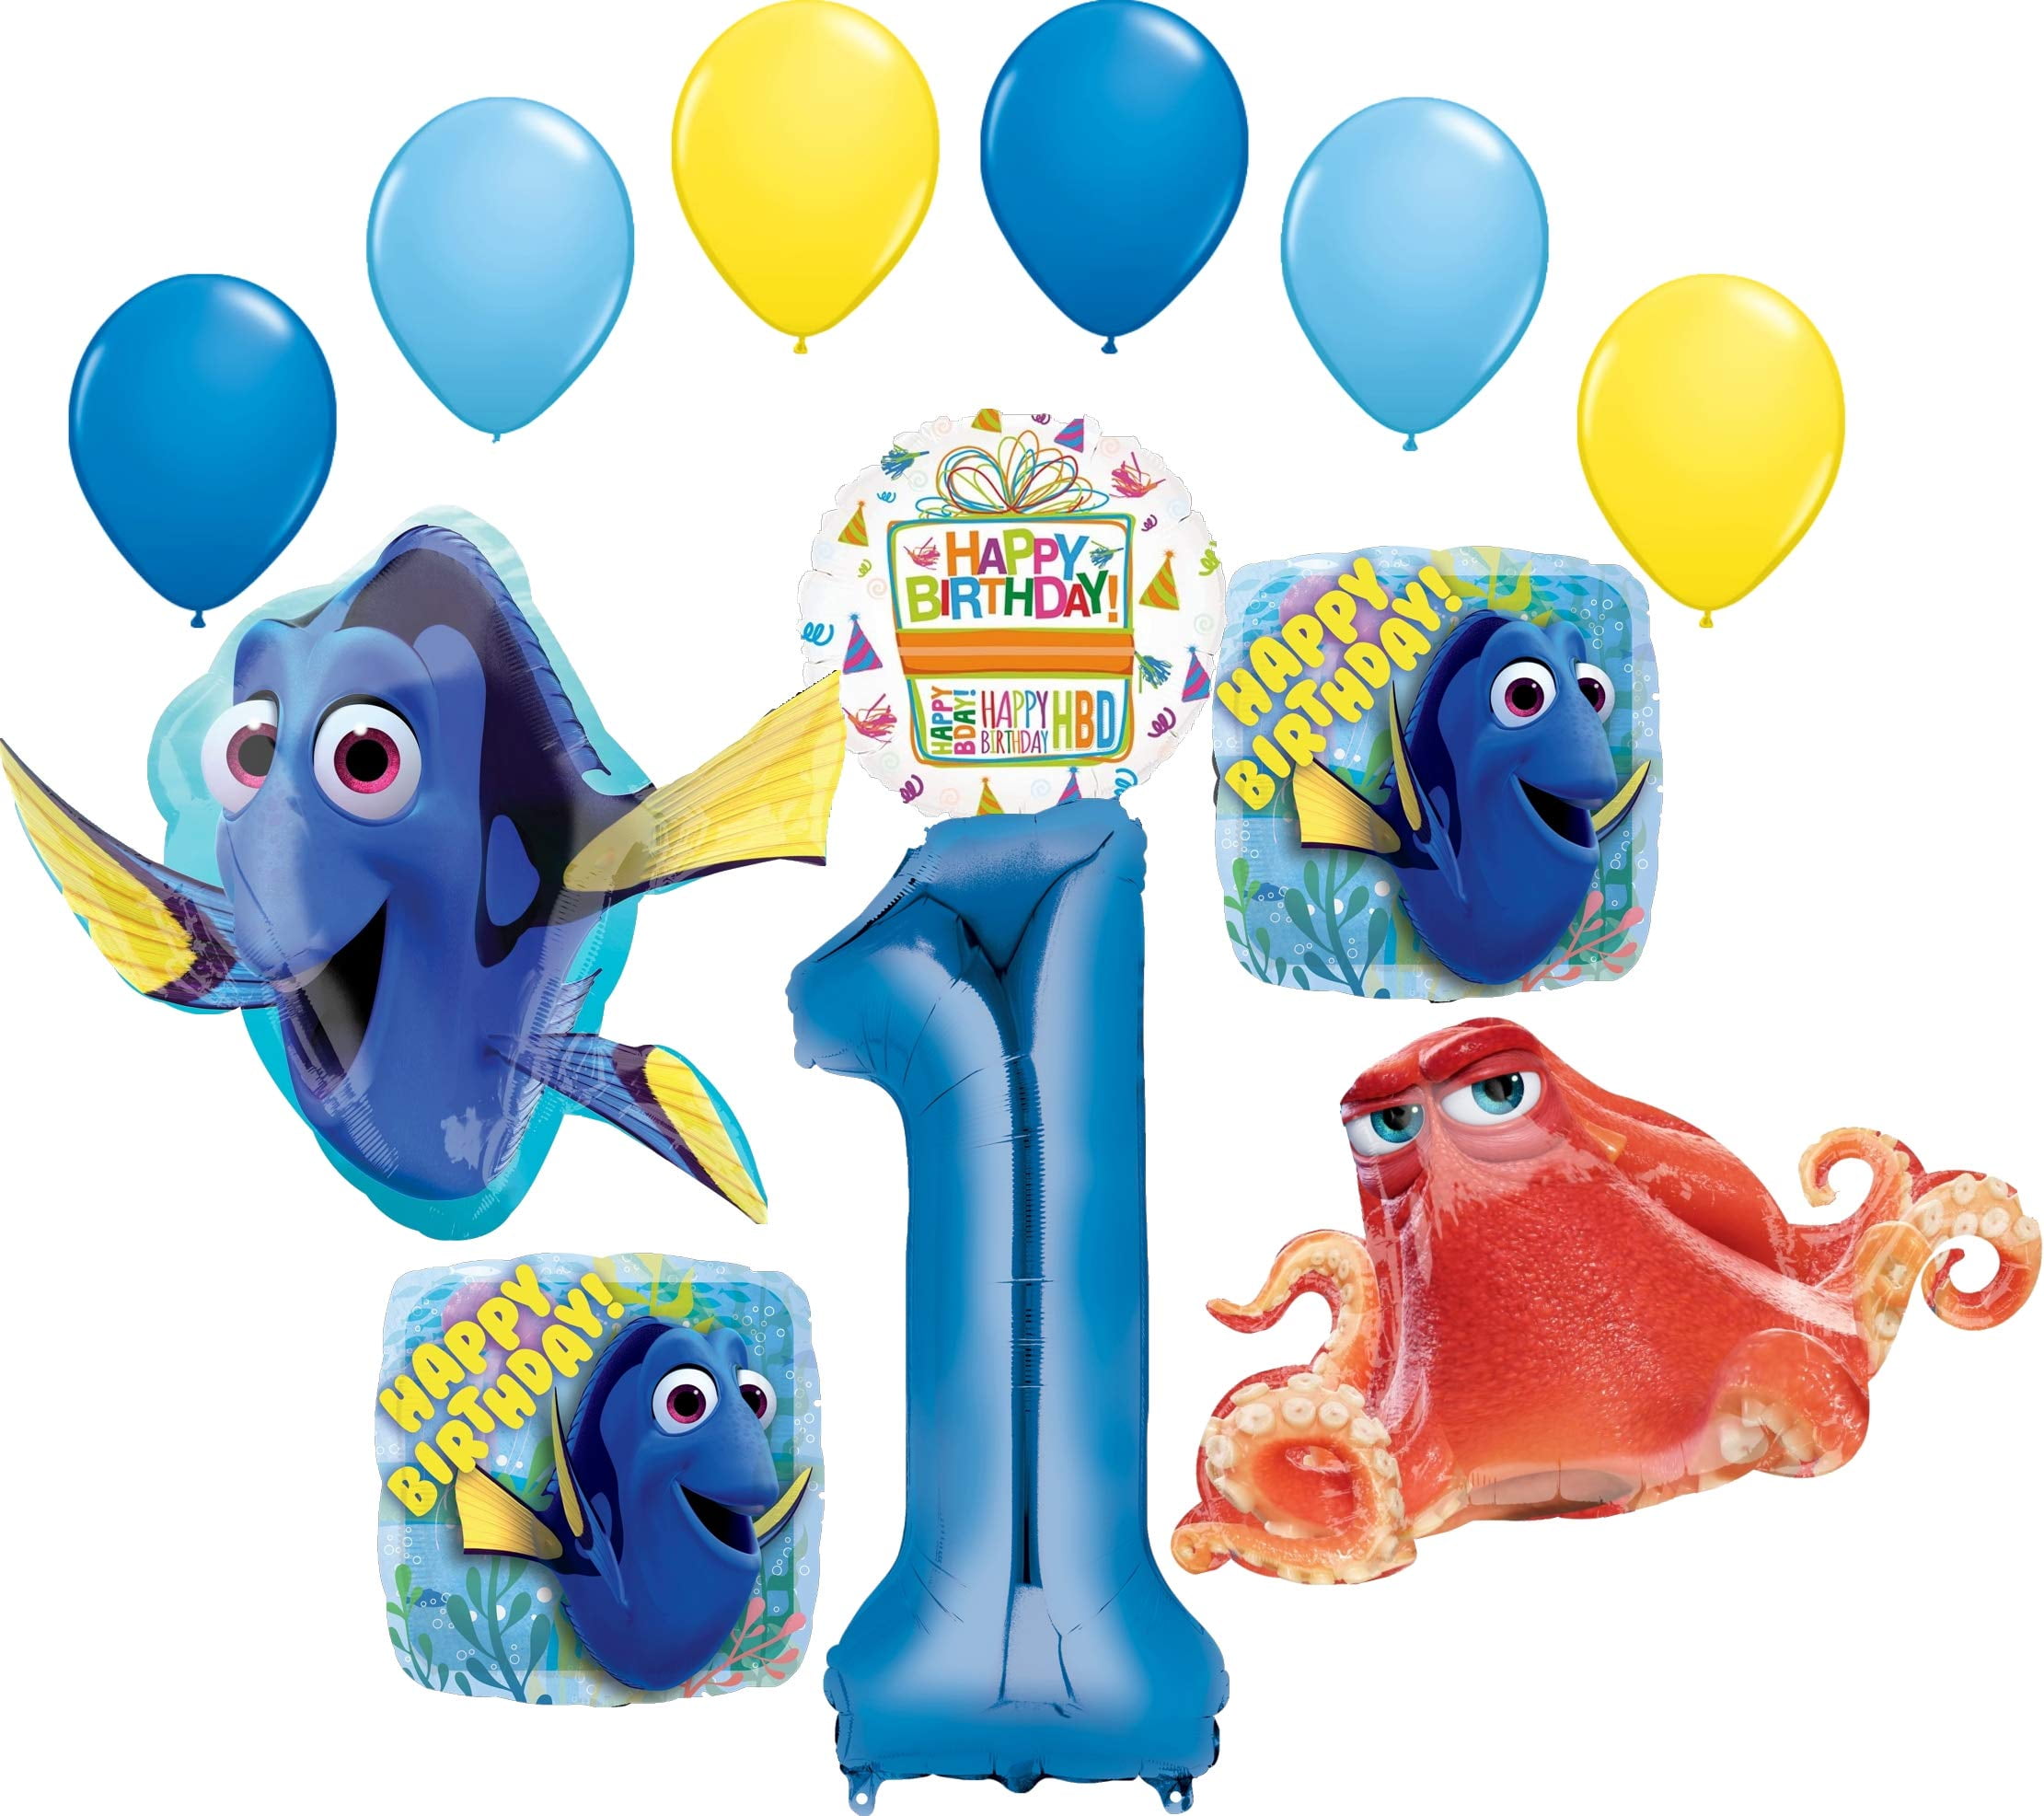 Finding Nemo Party Supplies Balloons Decoration Bundle for 4th Birthday 